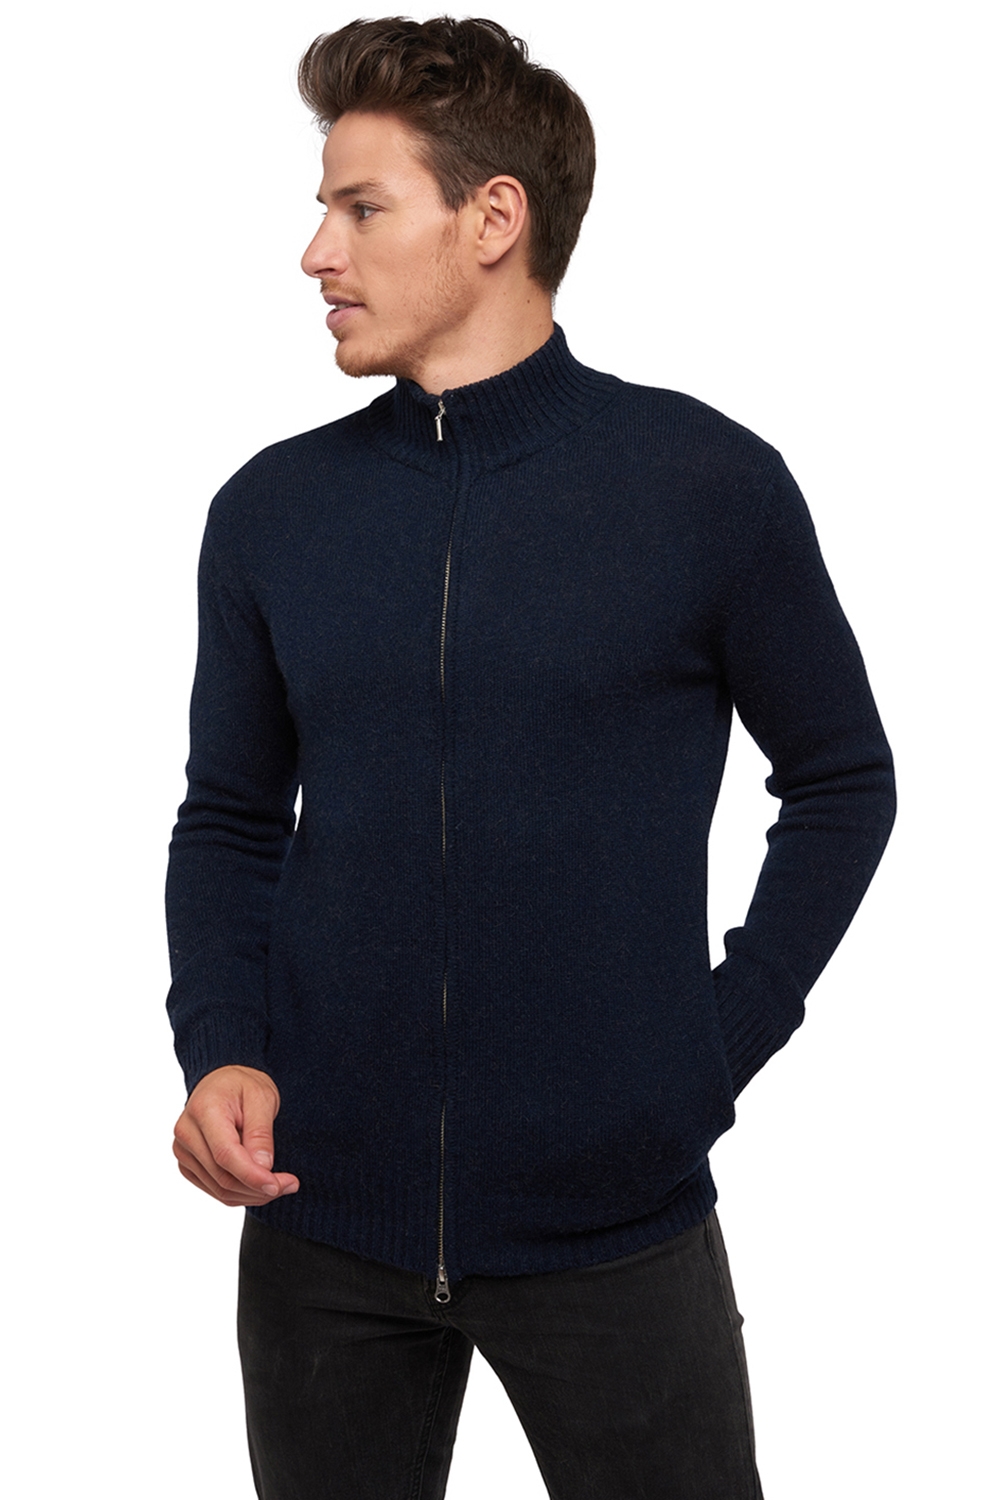 Chameau pull homme clyde marine s